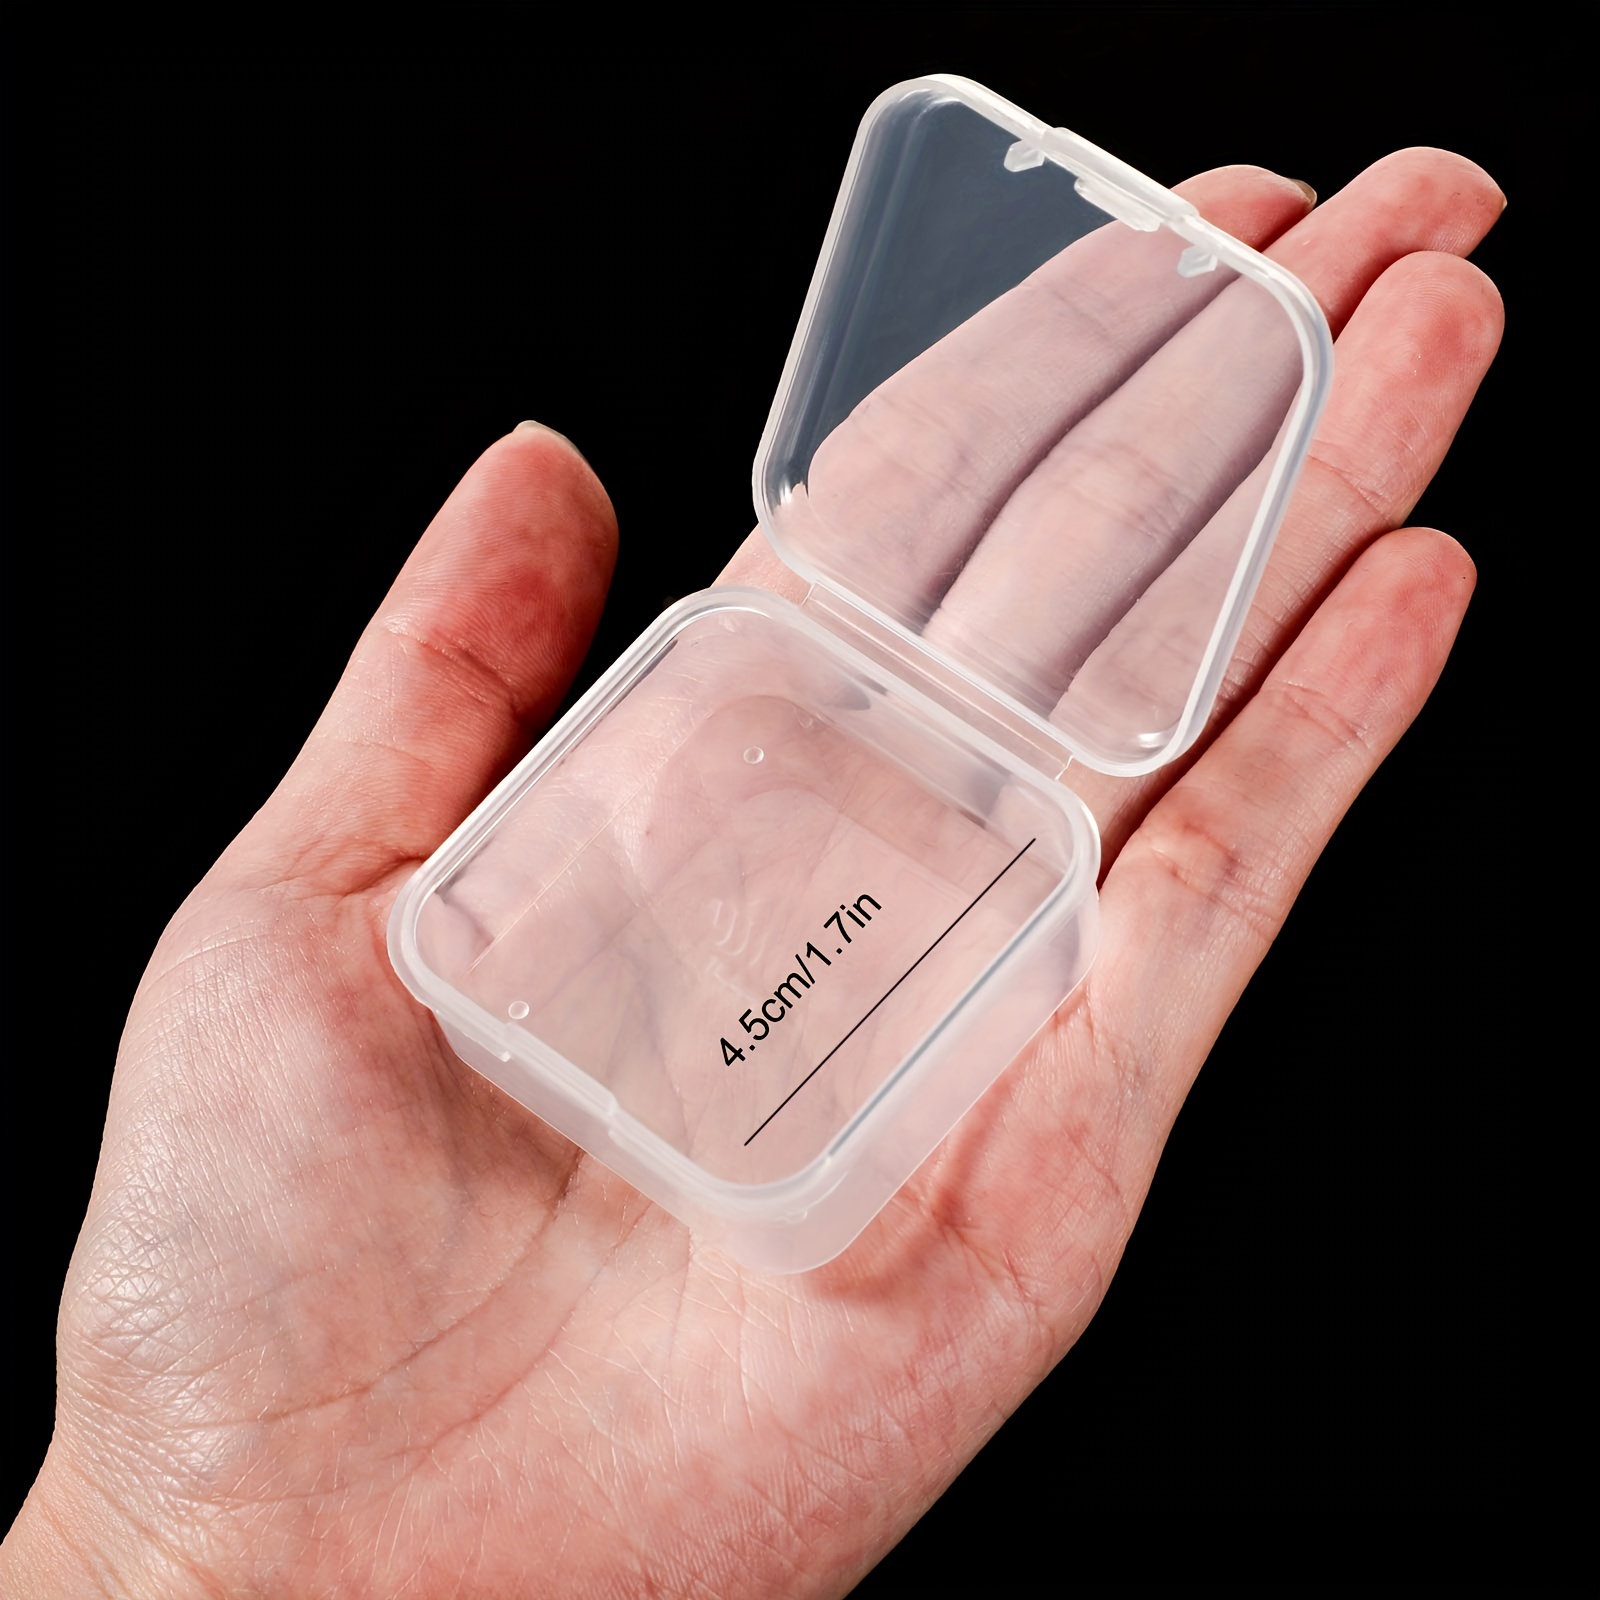 Small Plastic Box, 20 Pieces Square Clear Plastic, Small Storage Box, Beads  Storage Container Box for Pills, Herbs, Small Items(55*55*20 mm)